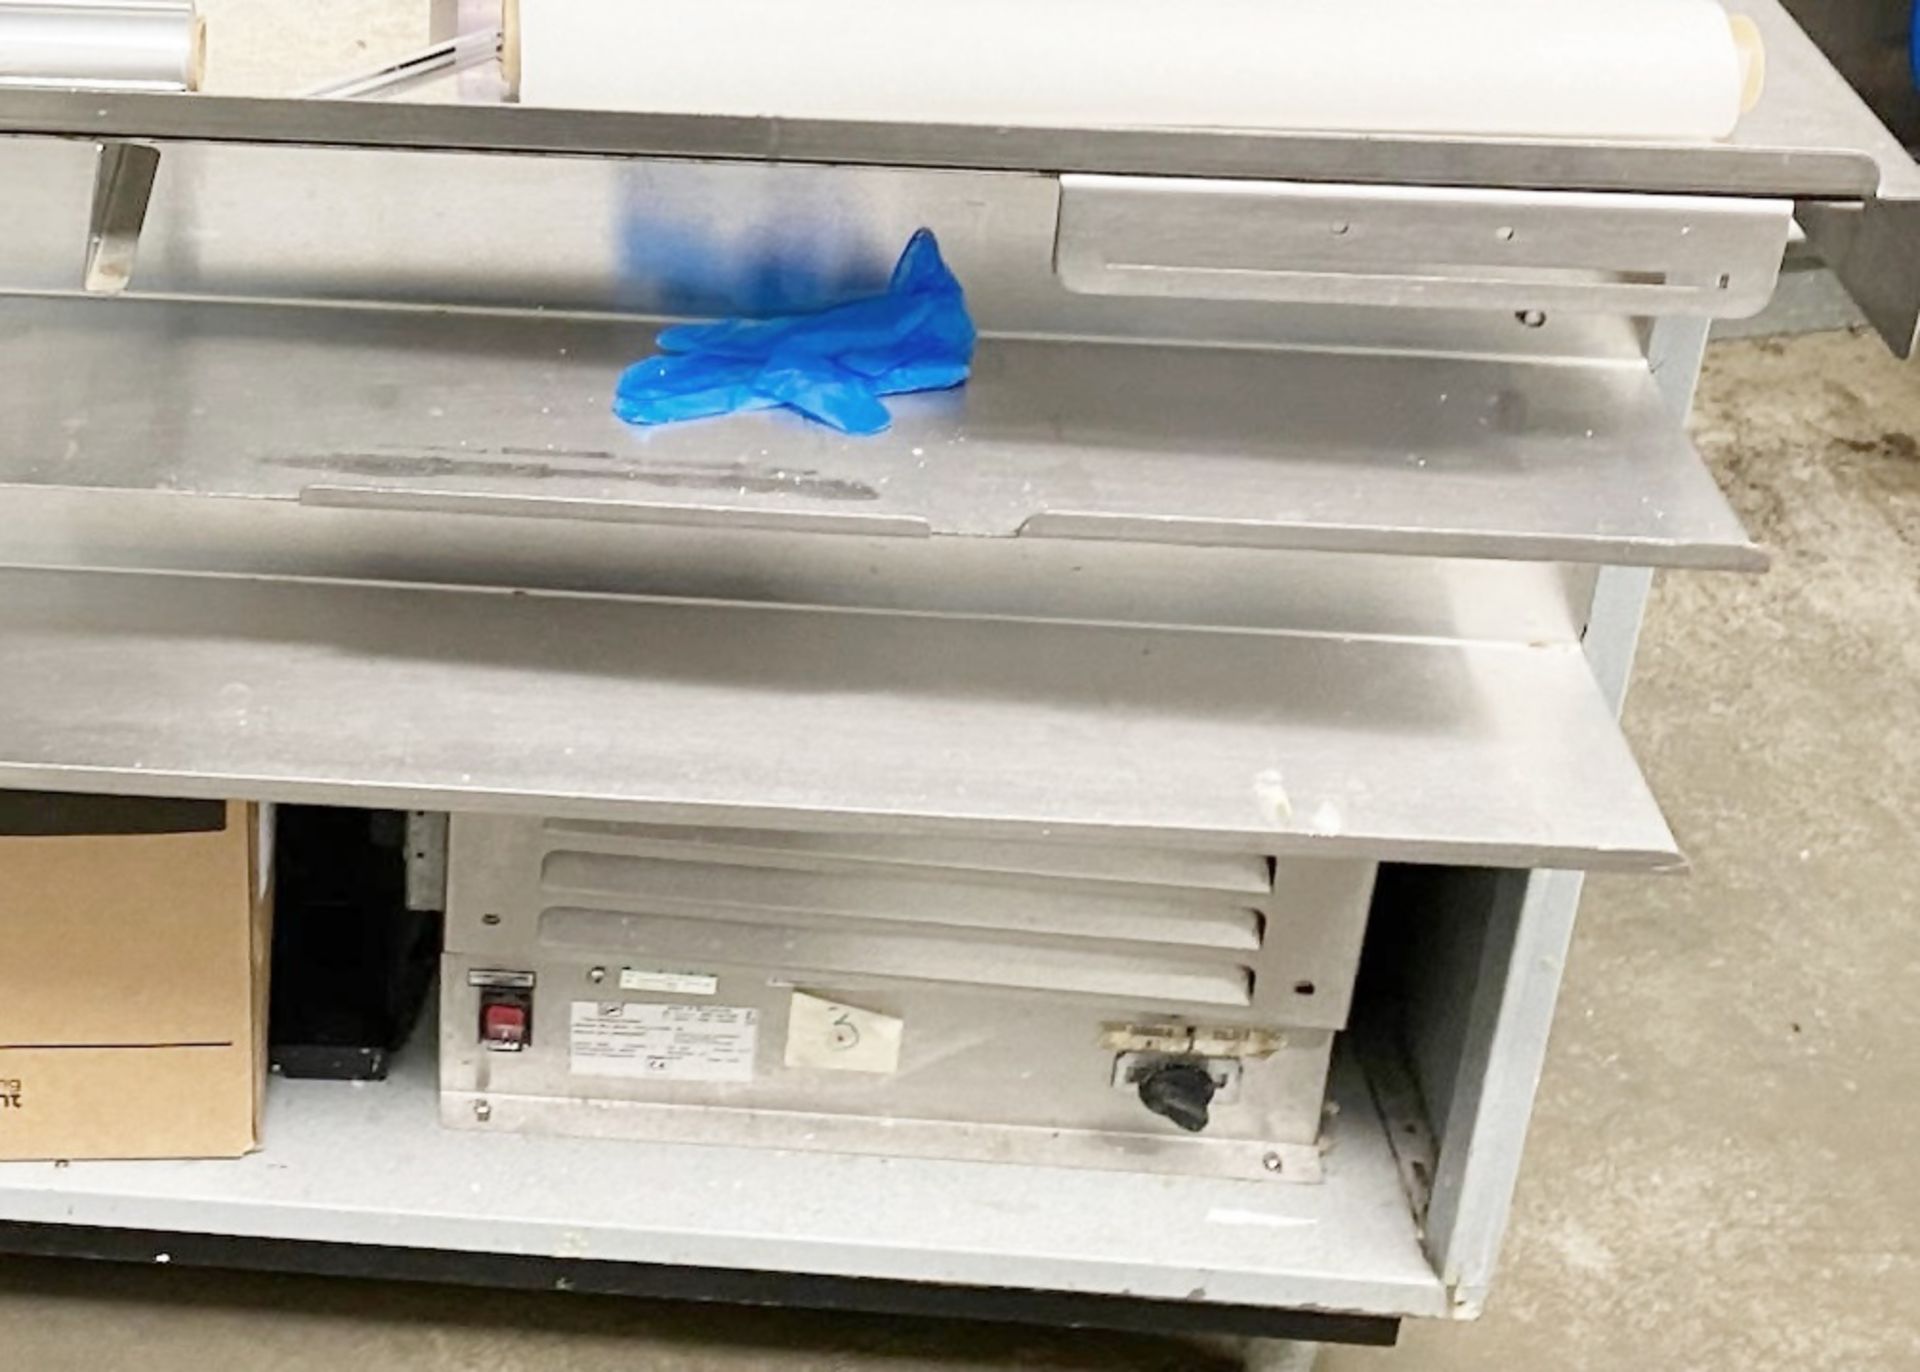 1 x Duke SWD600-60FL M Refrigerated Sandwich Prep Line With Slanted Glass Screen - As Used in Subway - Image 6 of 10